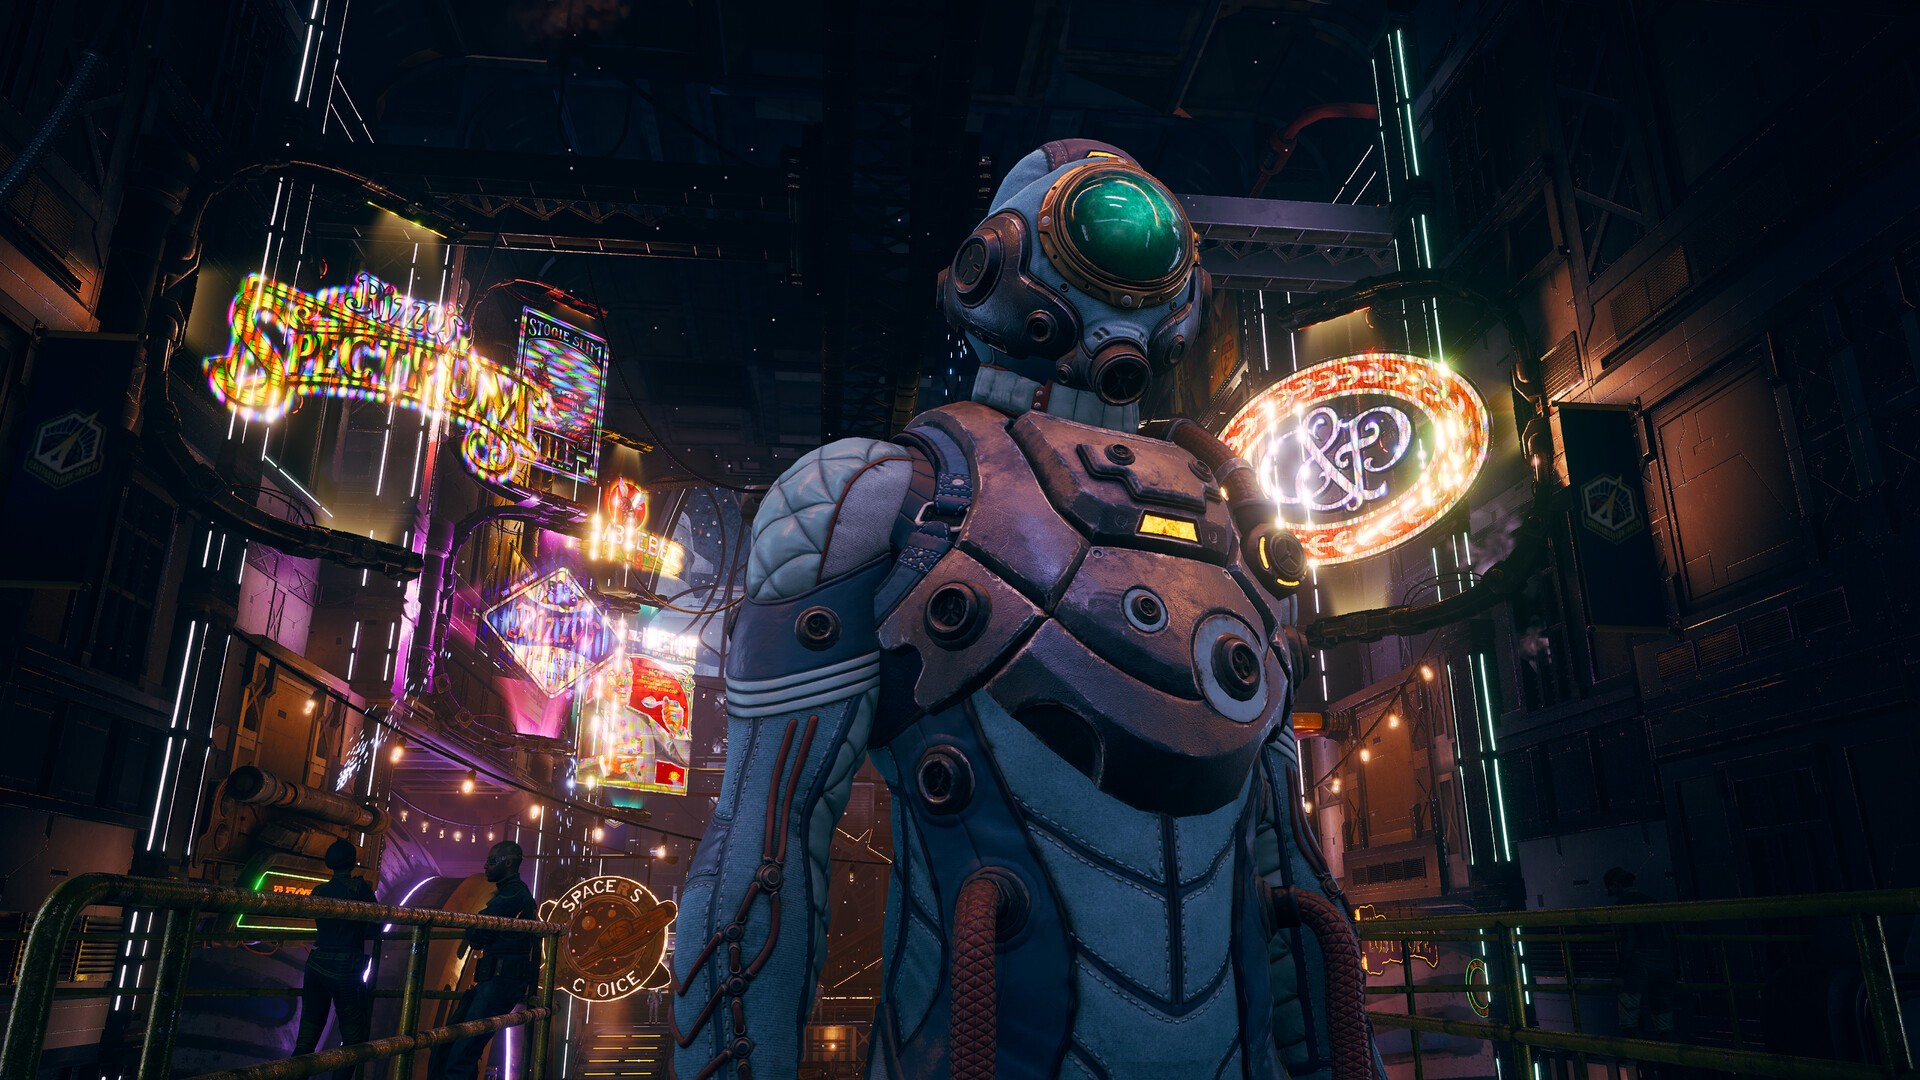 Скриншот из игры The Outer Worlds: Spacer